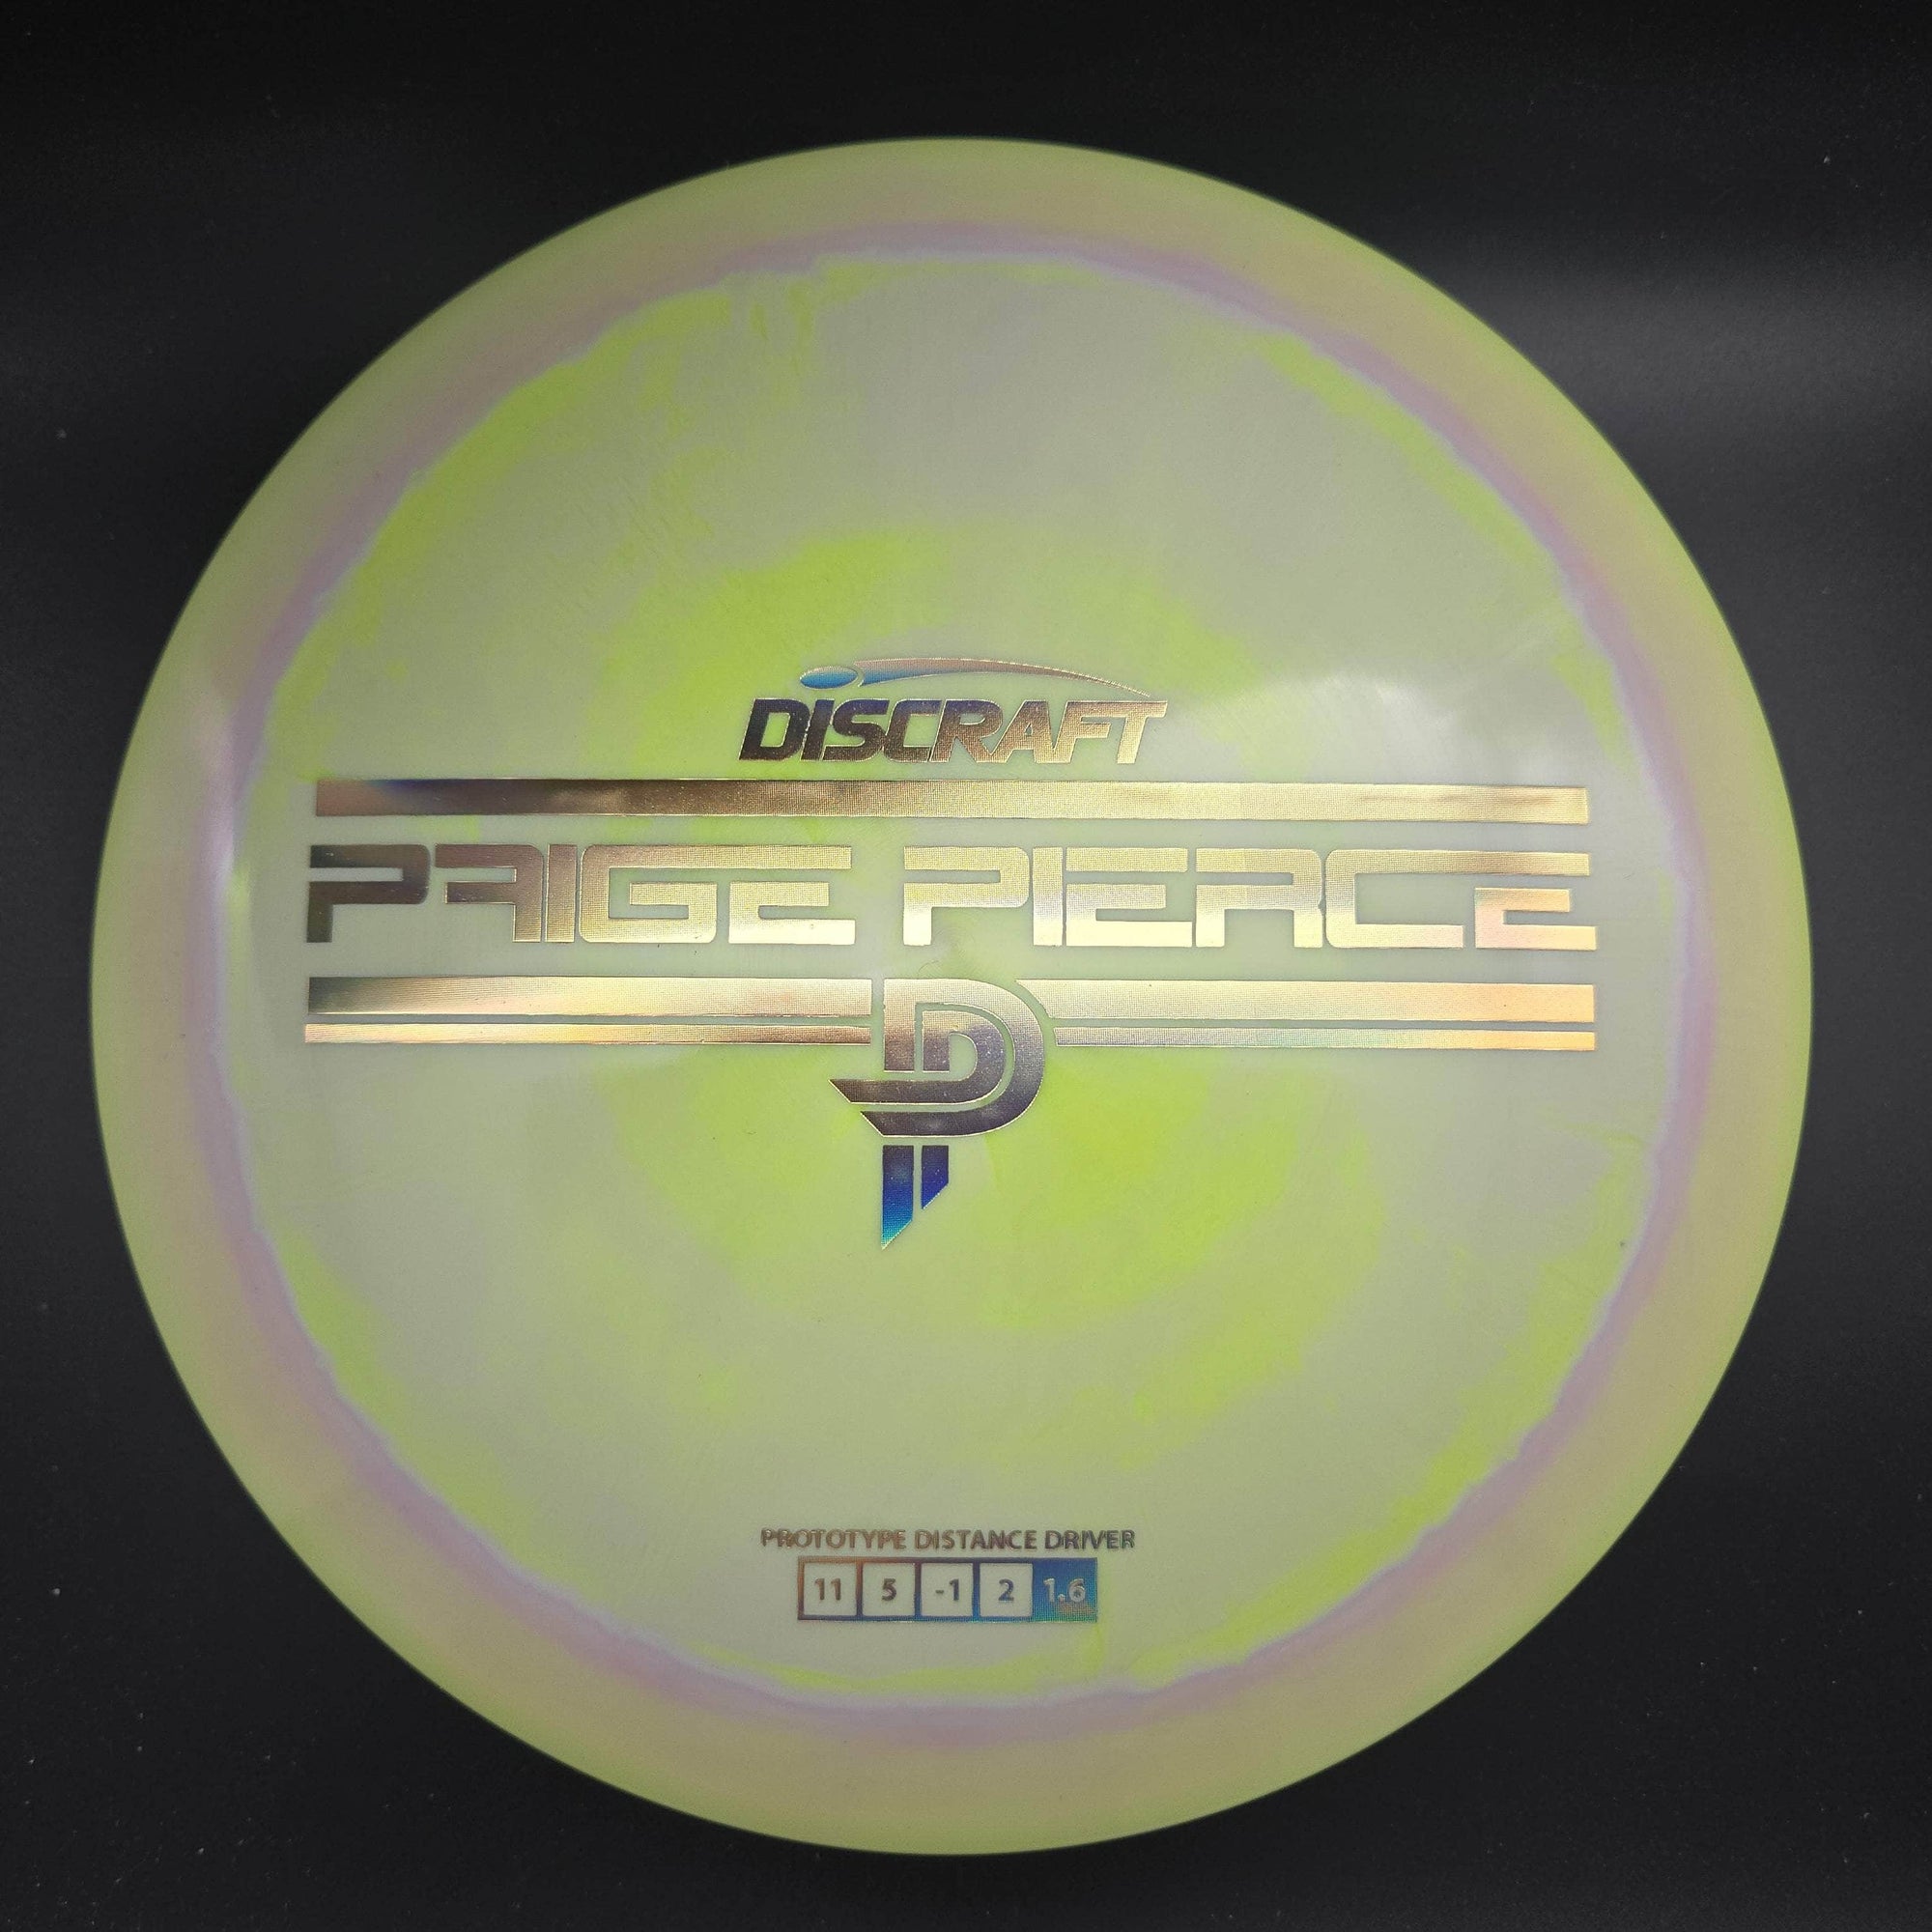 Discraft Distance Driver Yellow Gold Holo Stamp 174g Drive, ESP, Paige Pierce Prototype